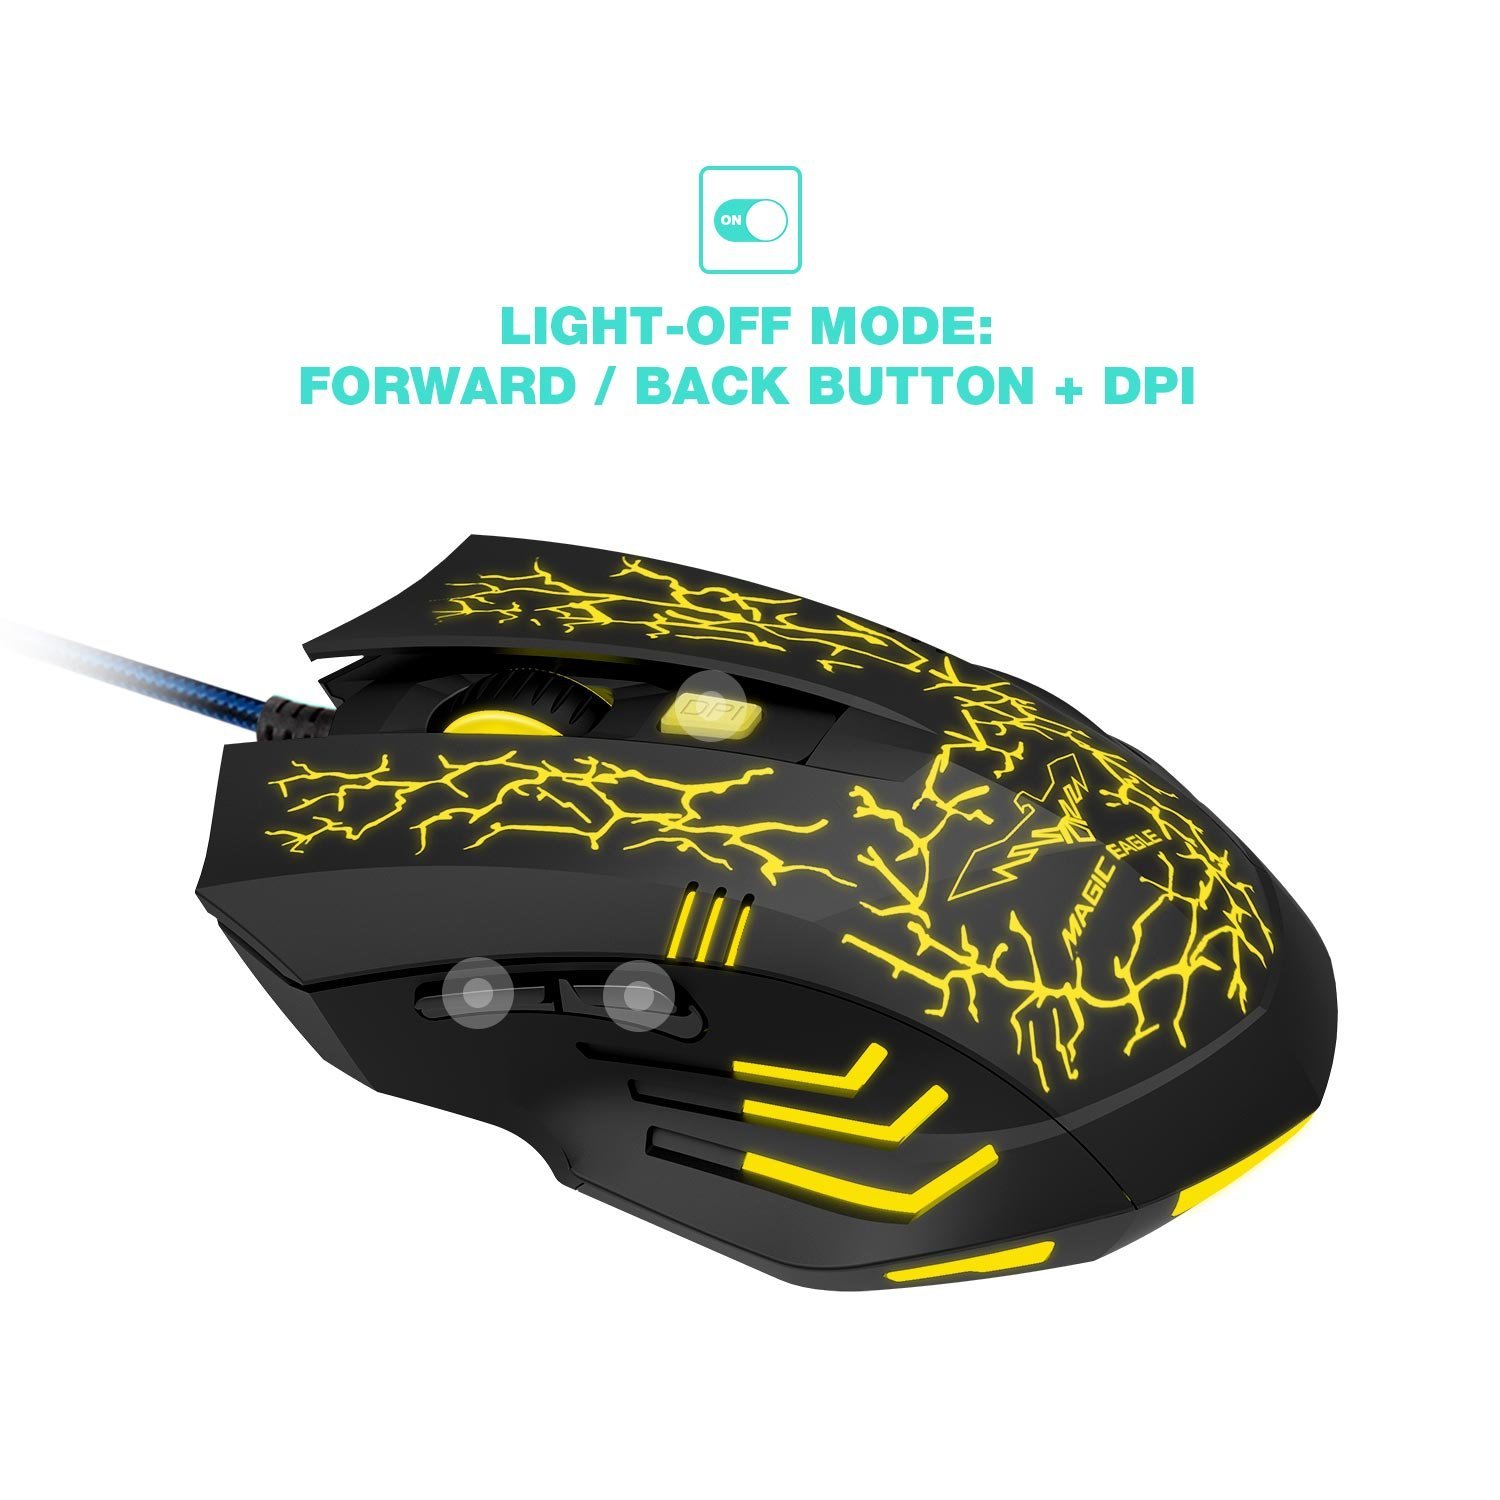 havit gaming mouse how to change dpi